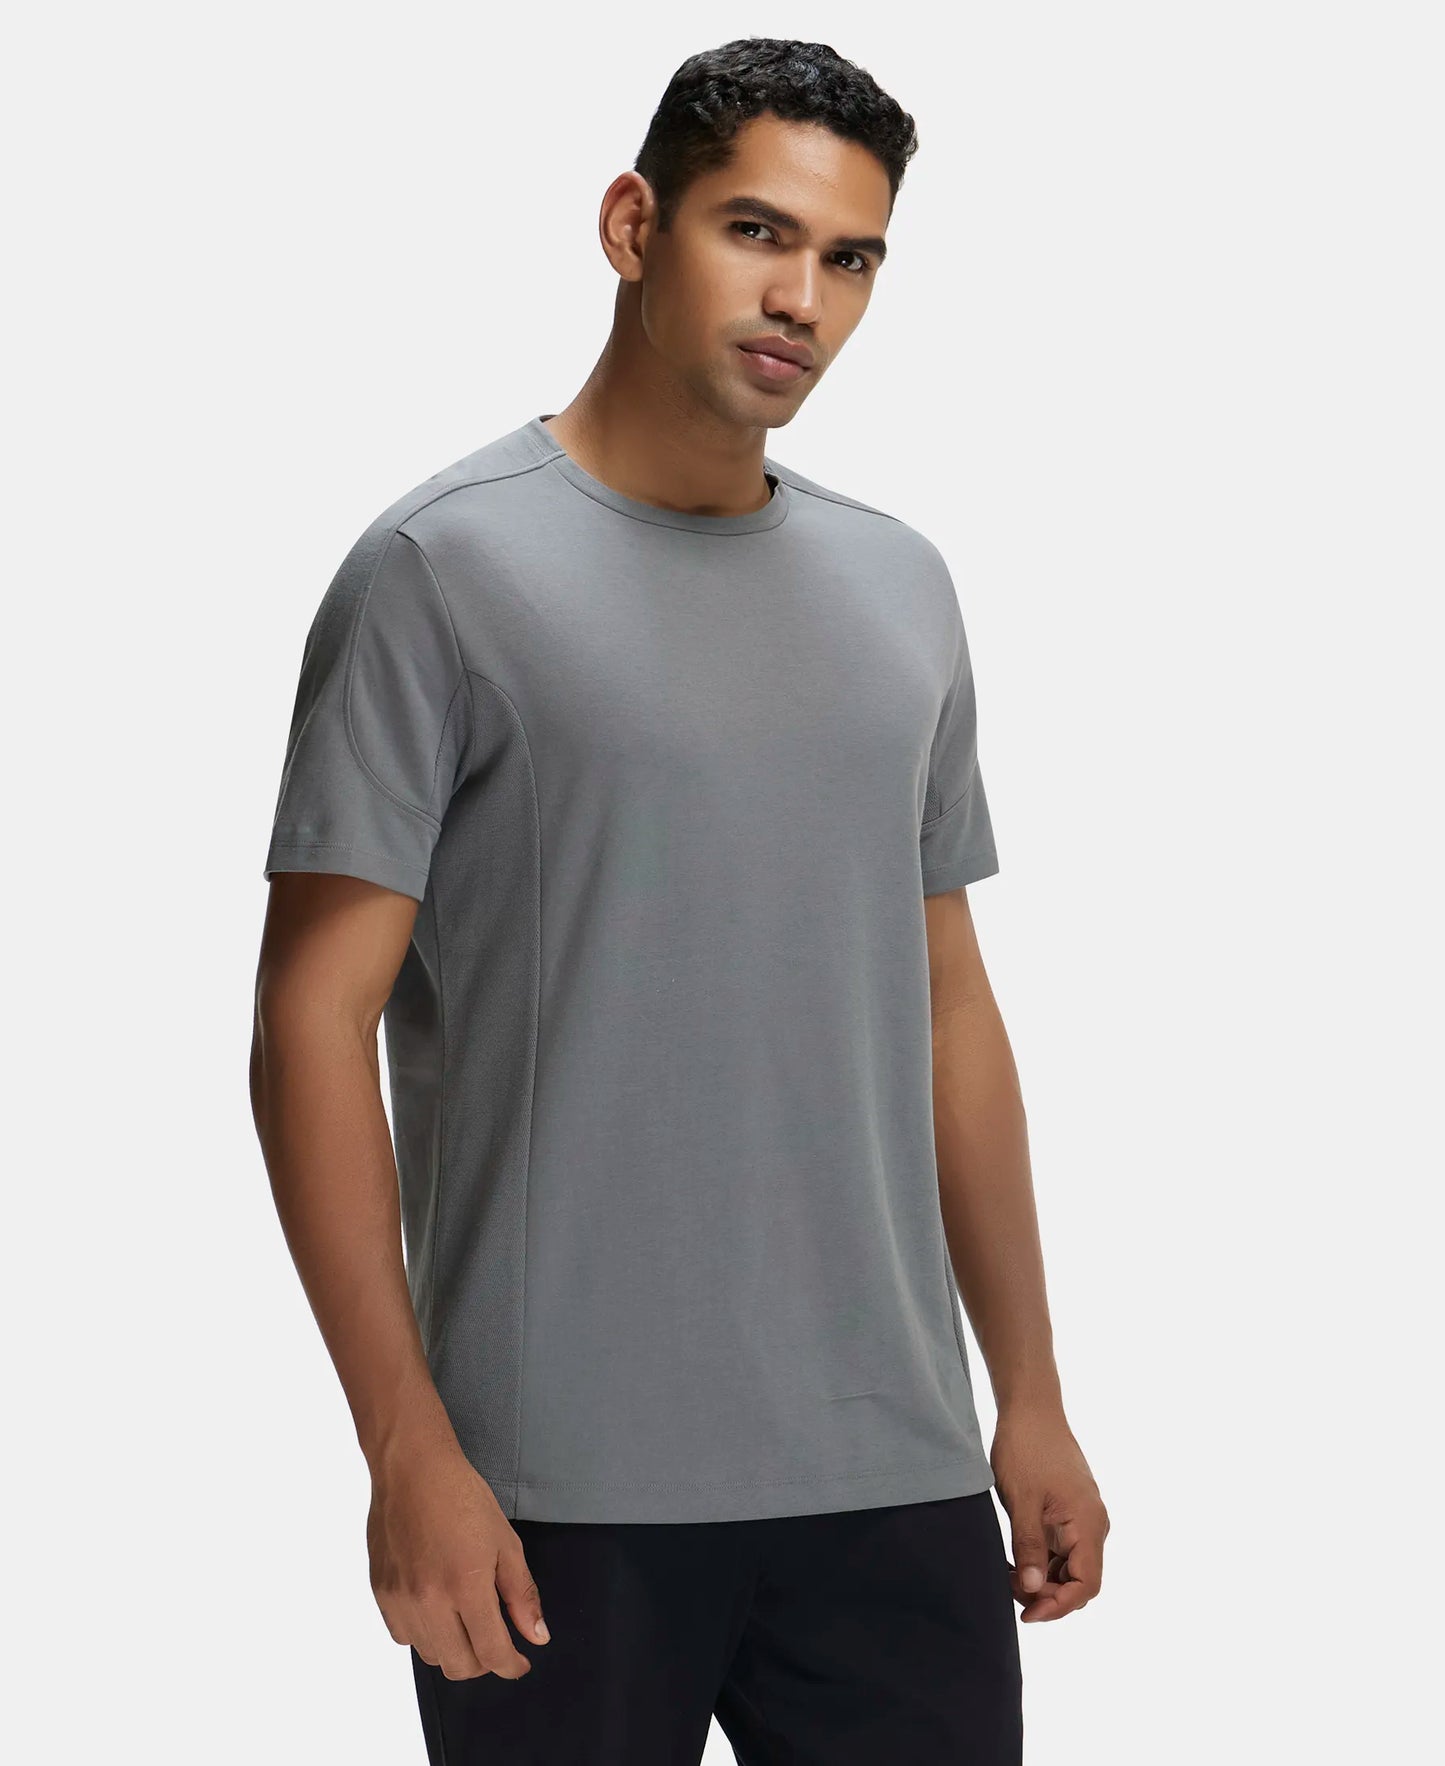 Super Combed Cotton Blend Solid Round Neck Half Sleeve T-Shirt with Breathable Mesh - Quiet Shade-2